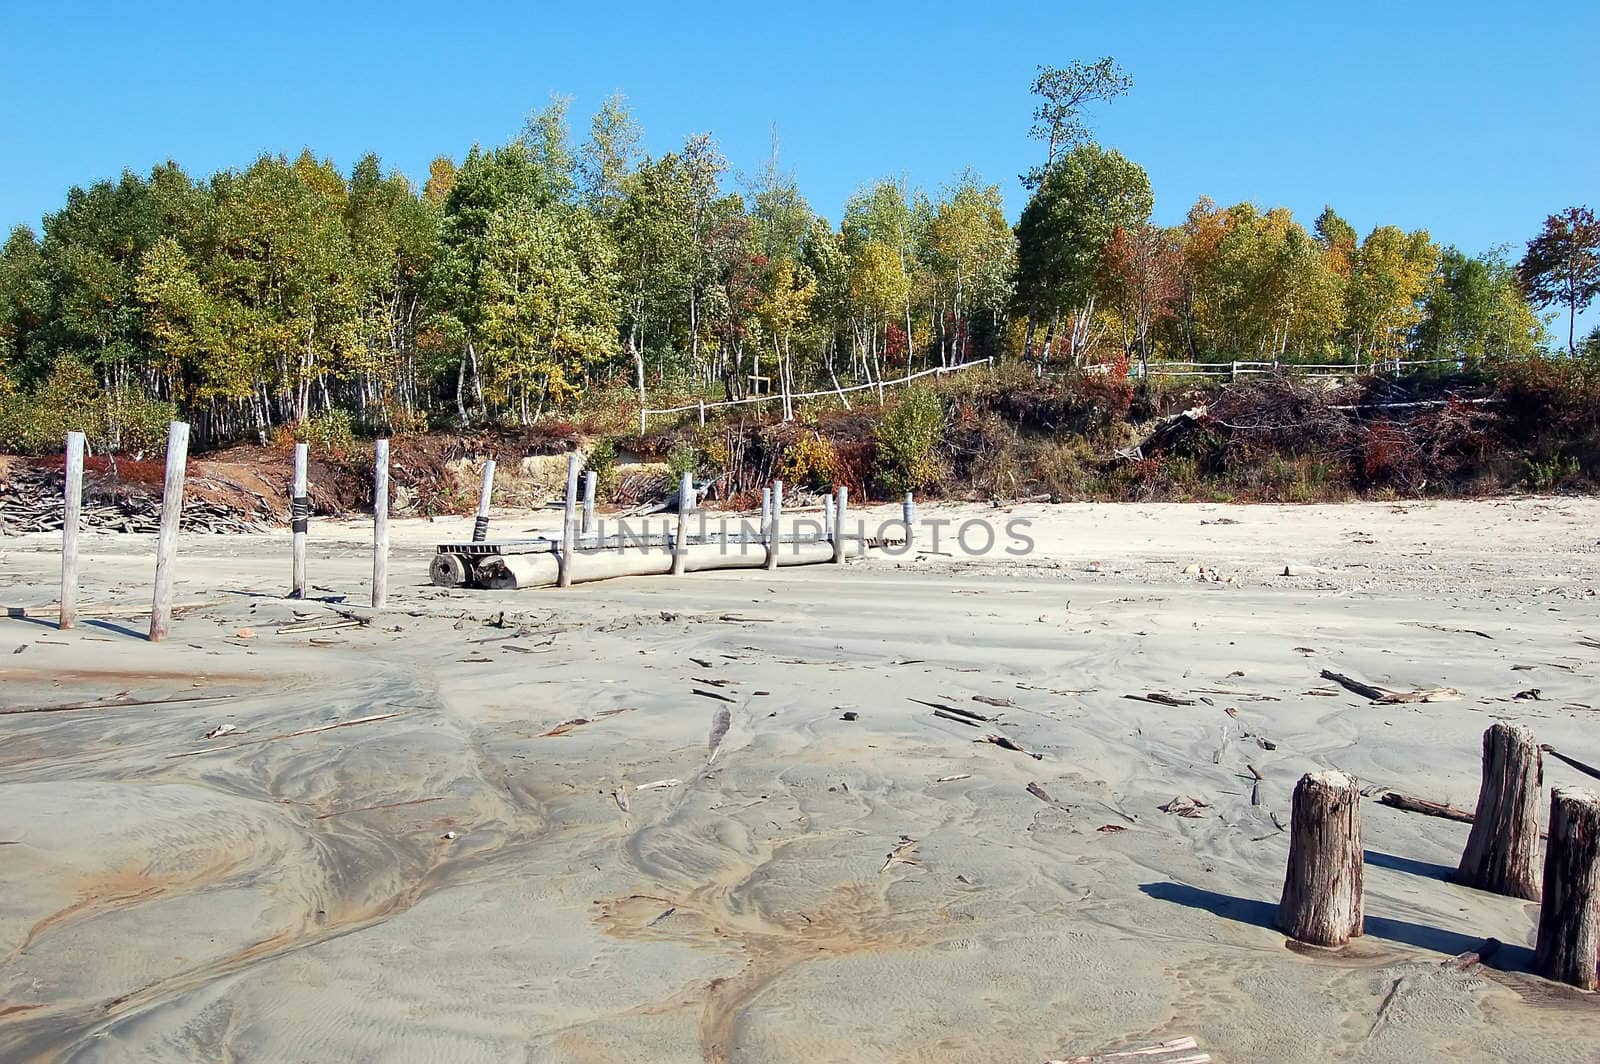 View of a dried up lake due to the Global Warming